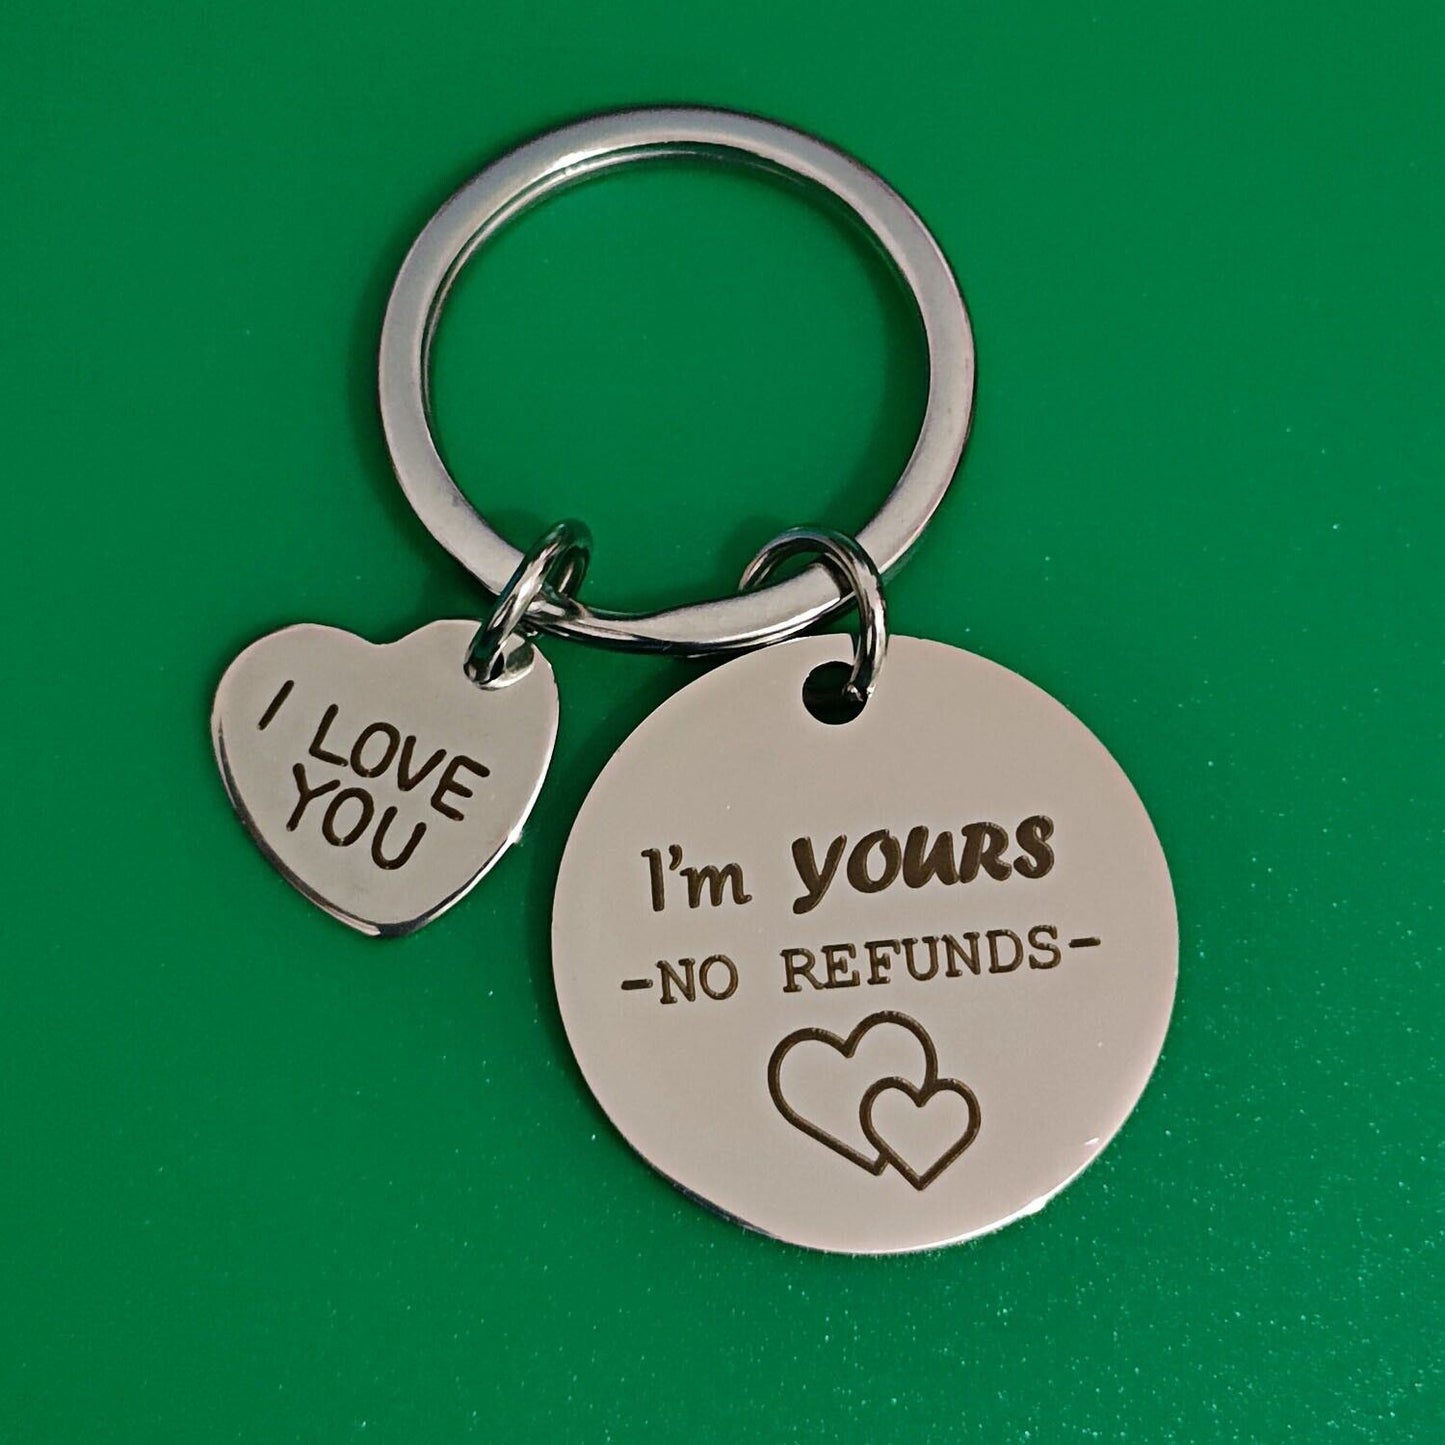 Couple Funny Sexy Dirty Keychain Gifts For Her Girlfriend Wife Love Key Ring Tag